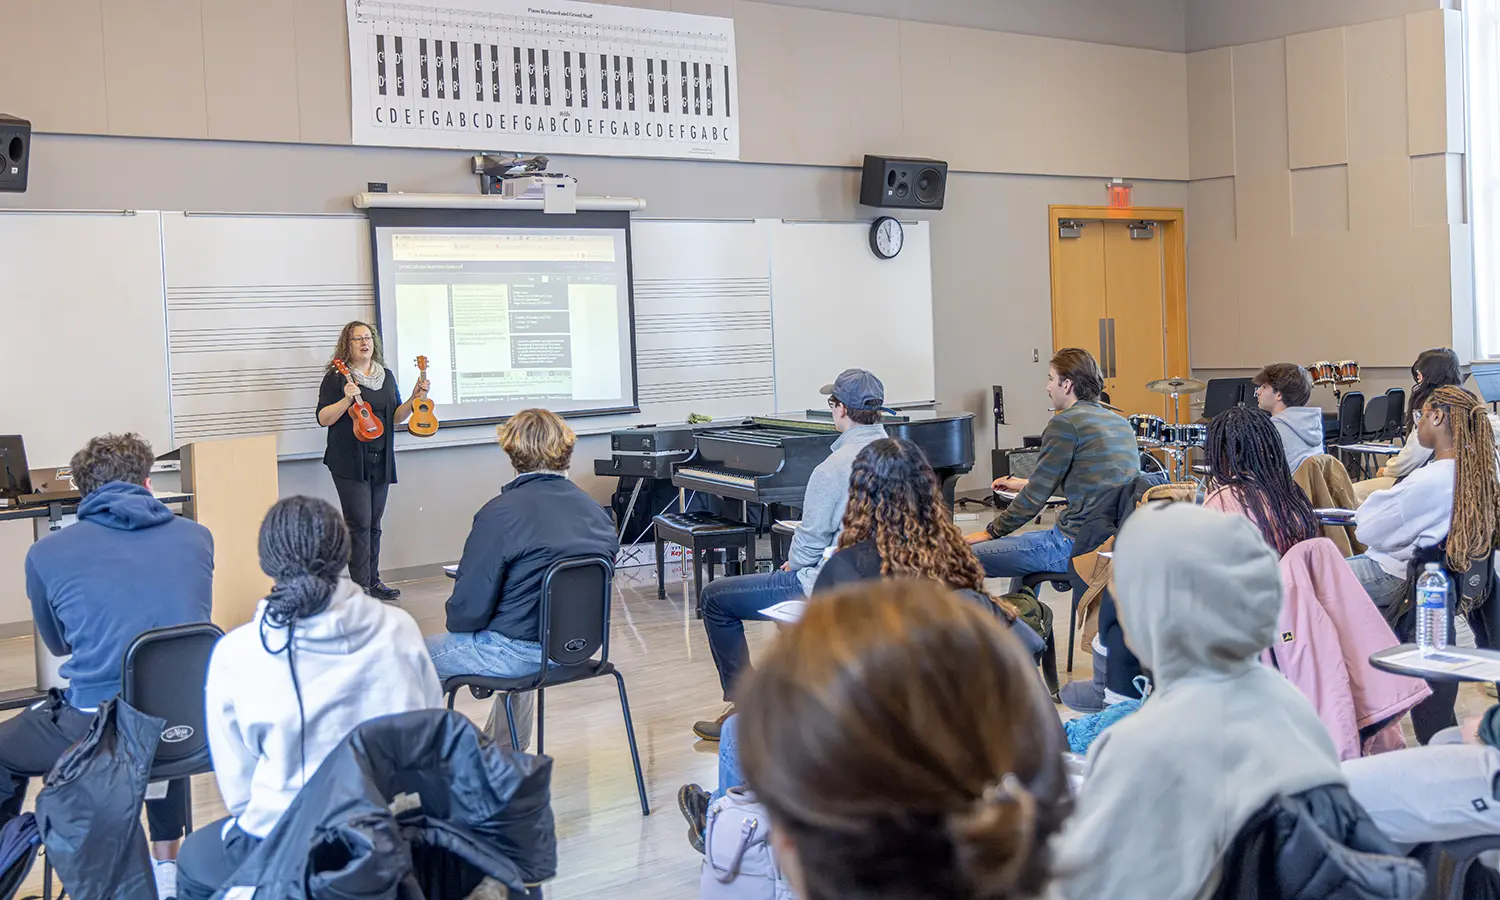 This week, we highlight the HWS faculty that have ranked among the best in the nation for the past seven years. Here, Associate Professor of Music Charity Lofthouse reviews ukuleles with students in the “How Music Works” course.